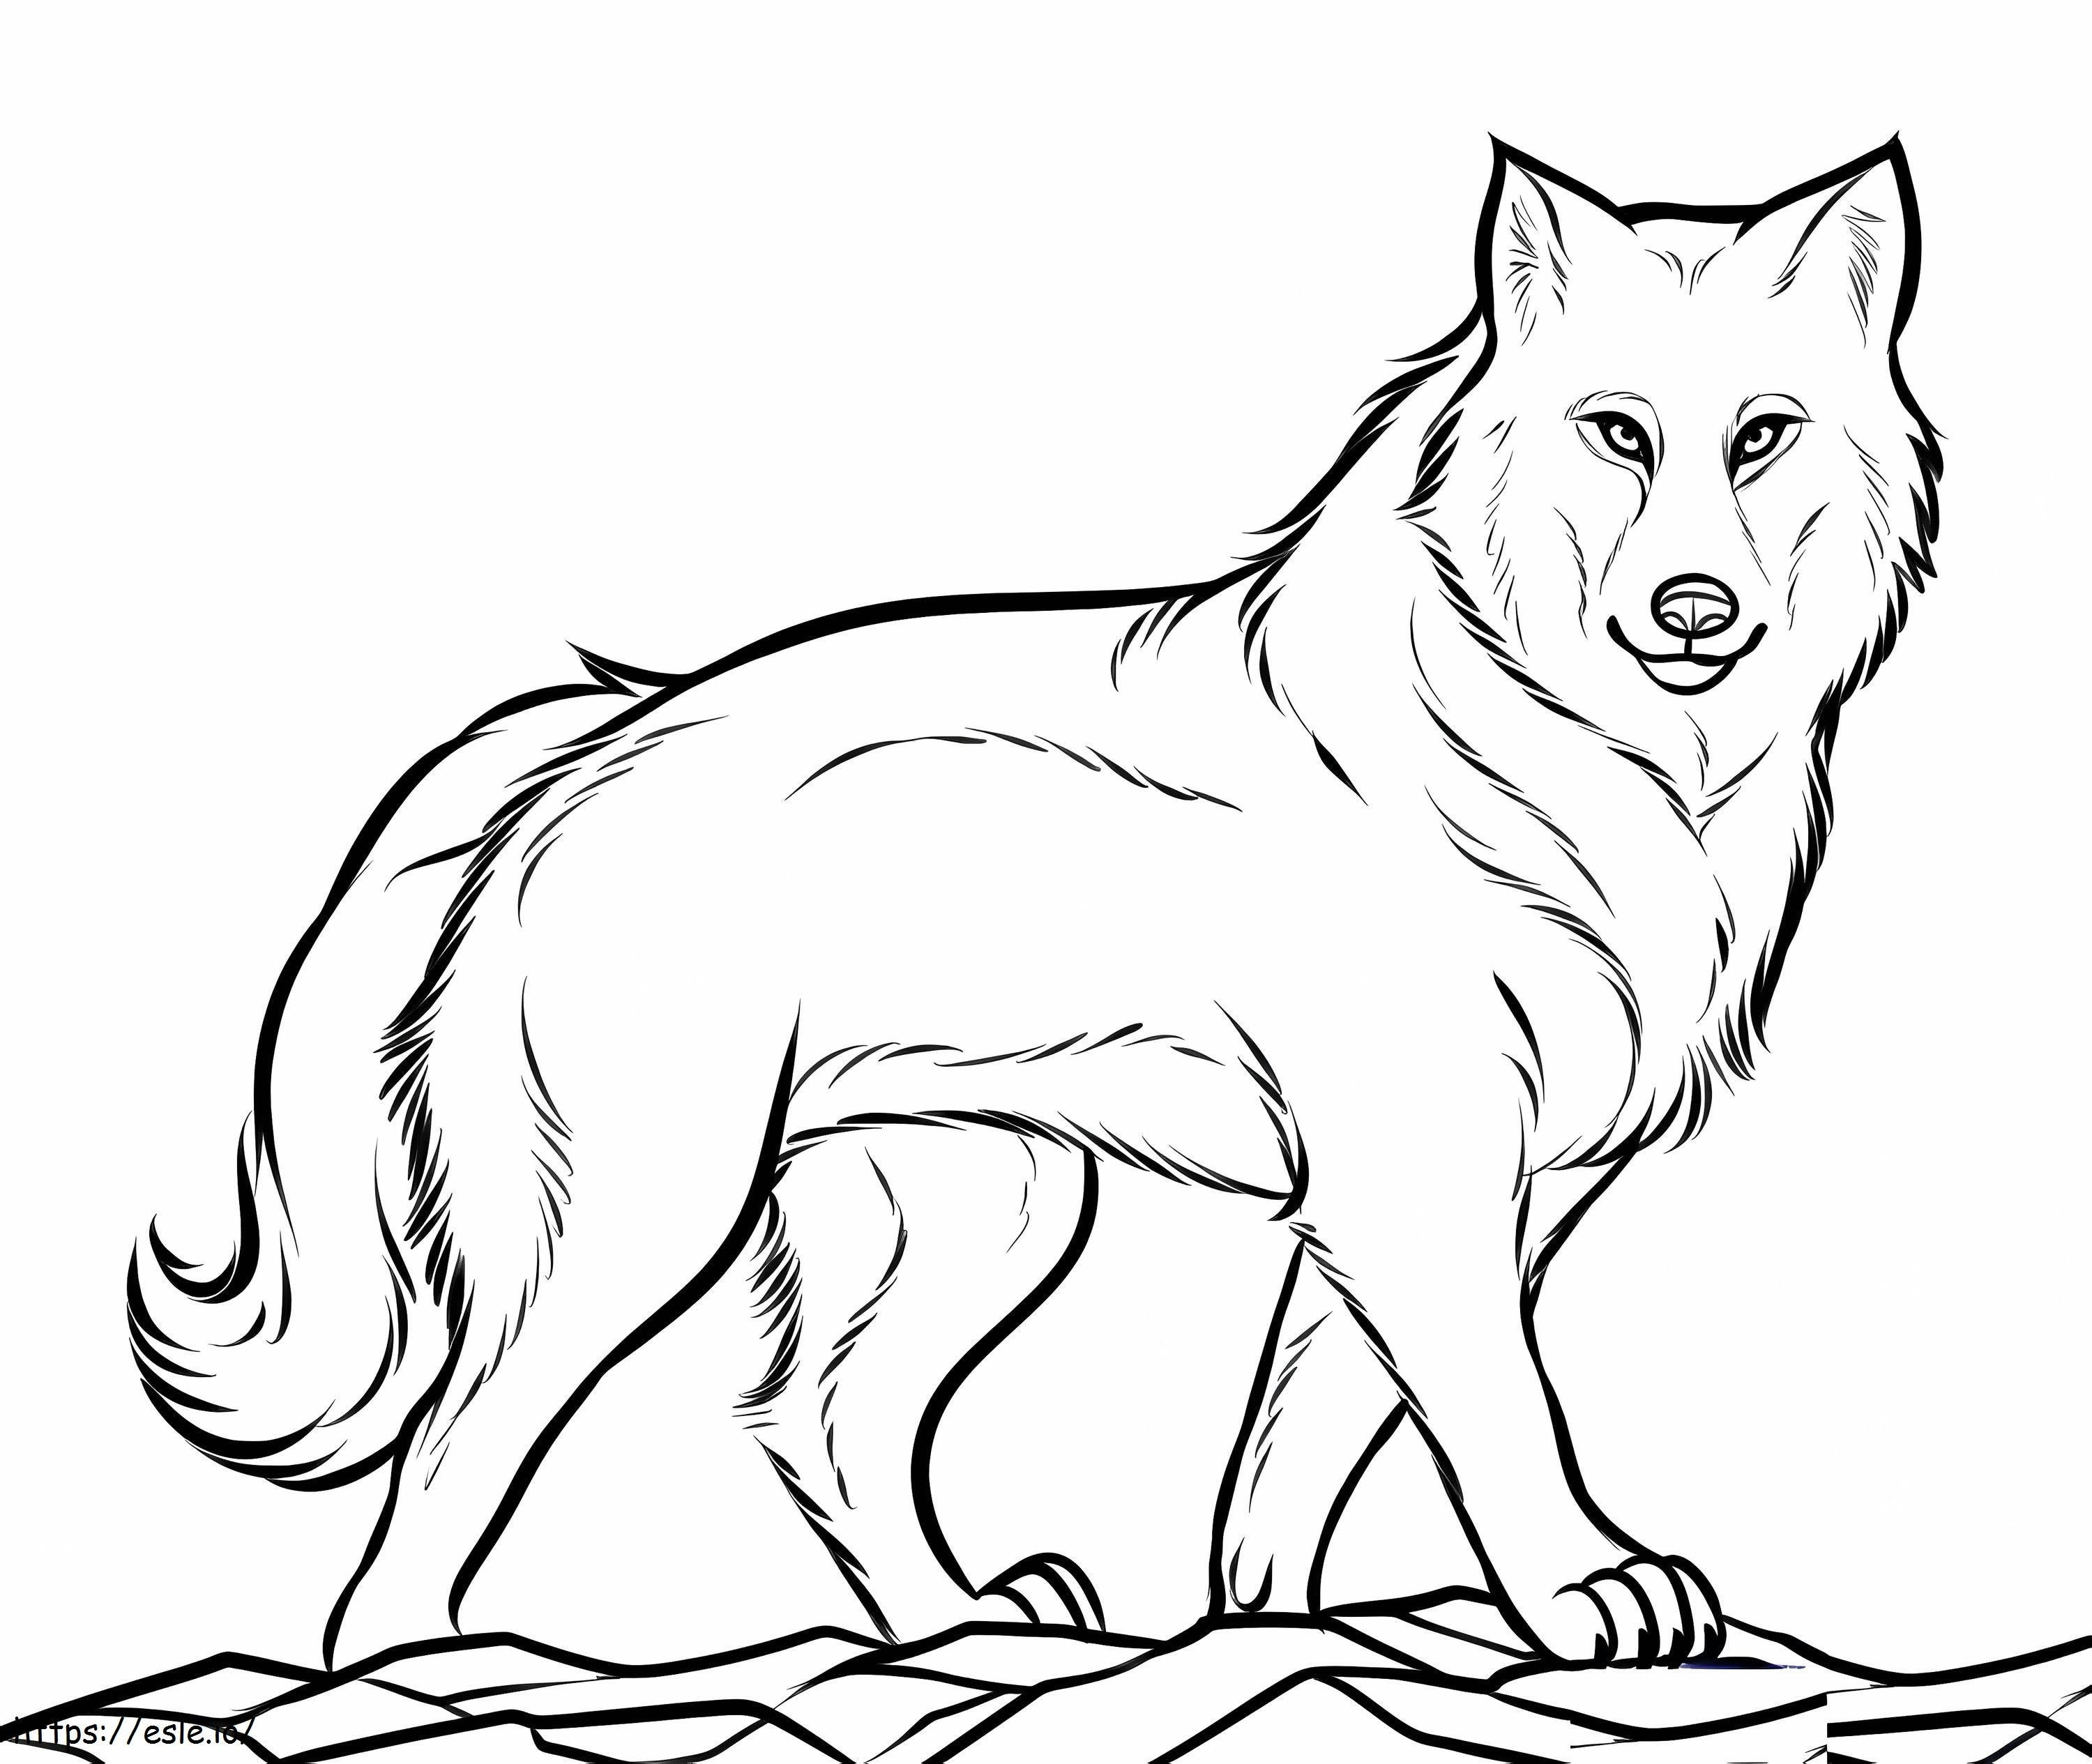 A Wolf coloring page